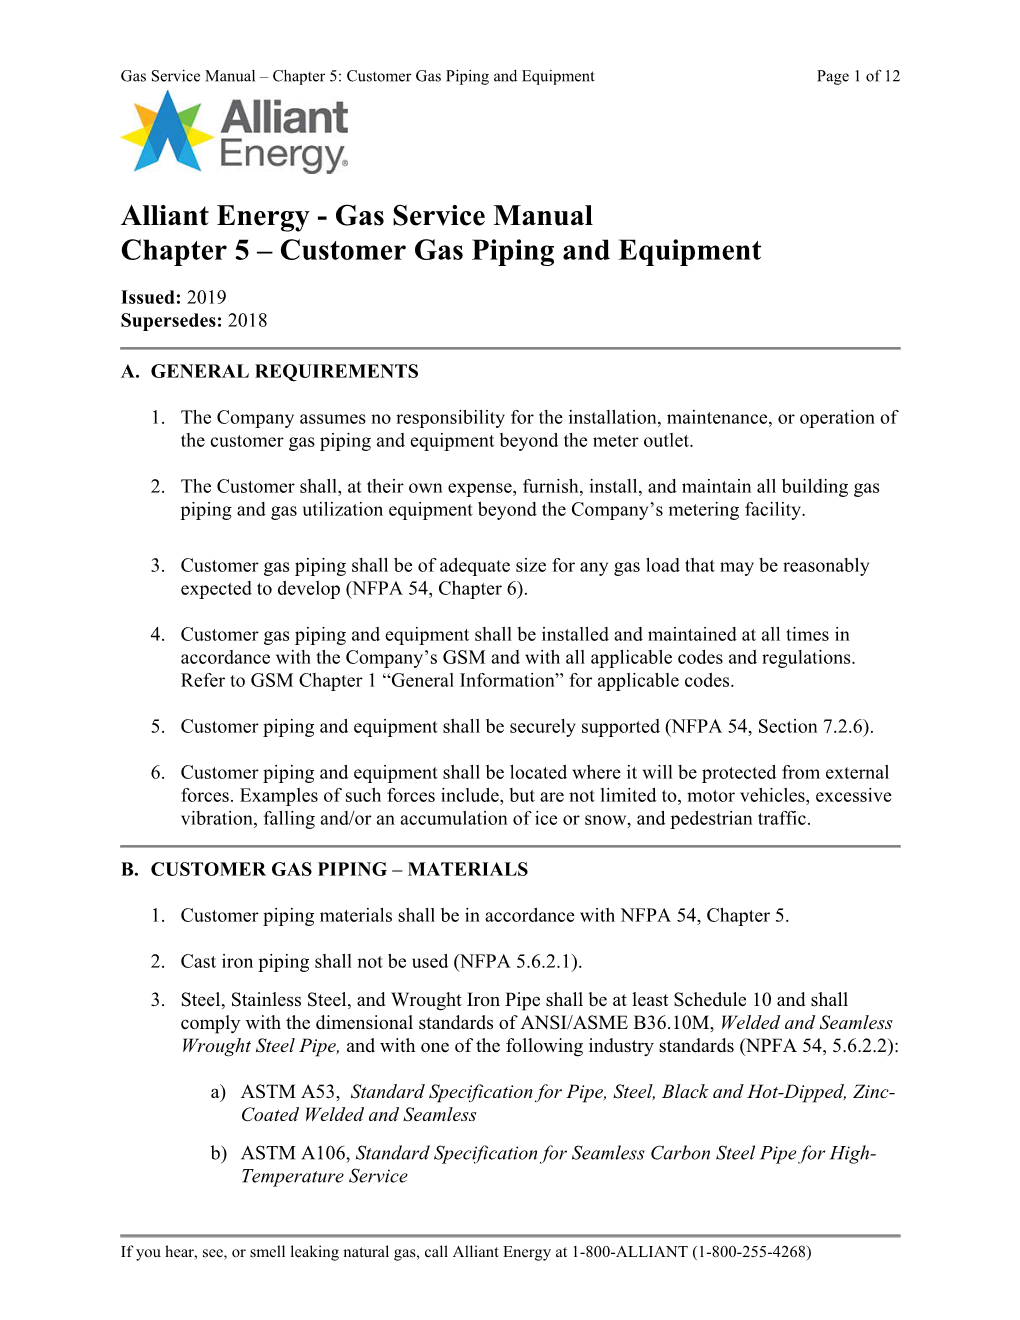 Chapter 5: Customer Gas Piping and Equipment Page 1 of 12